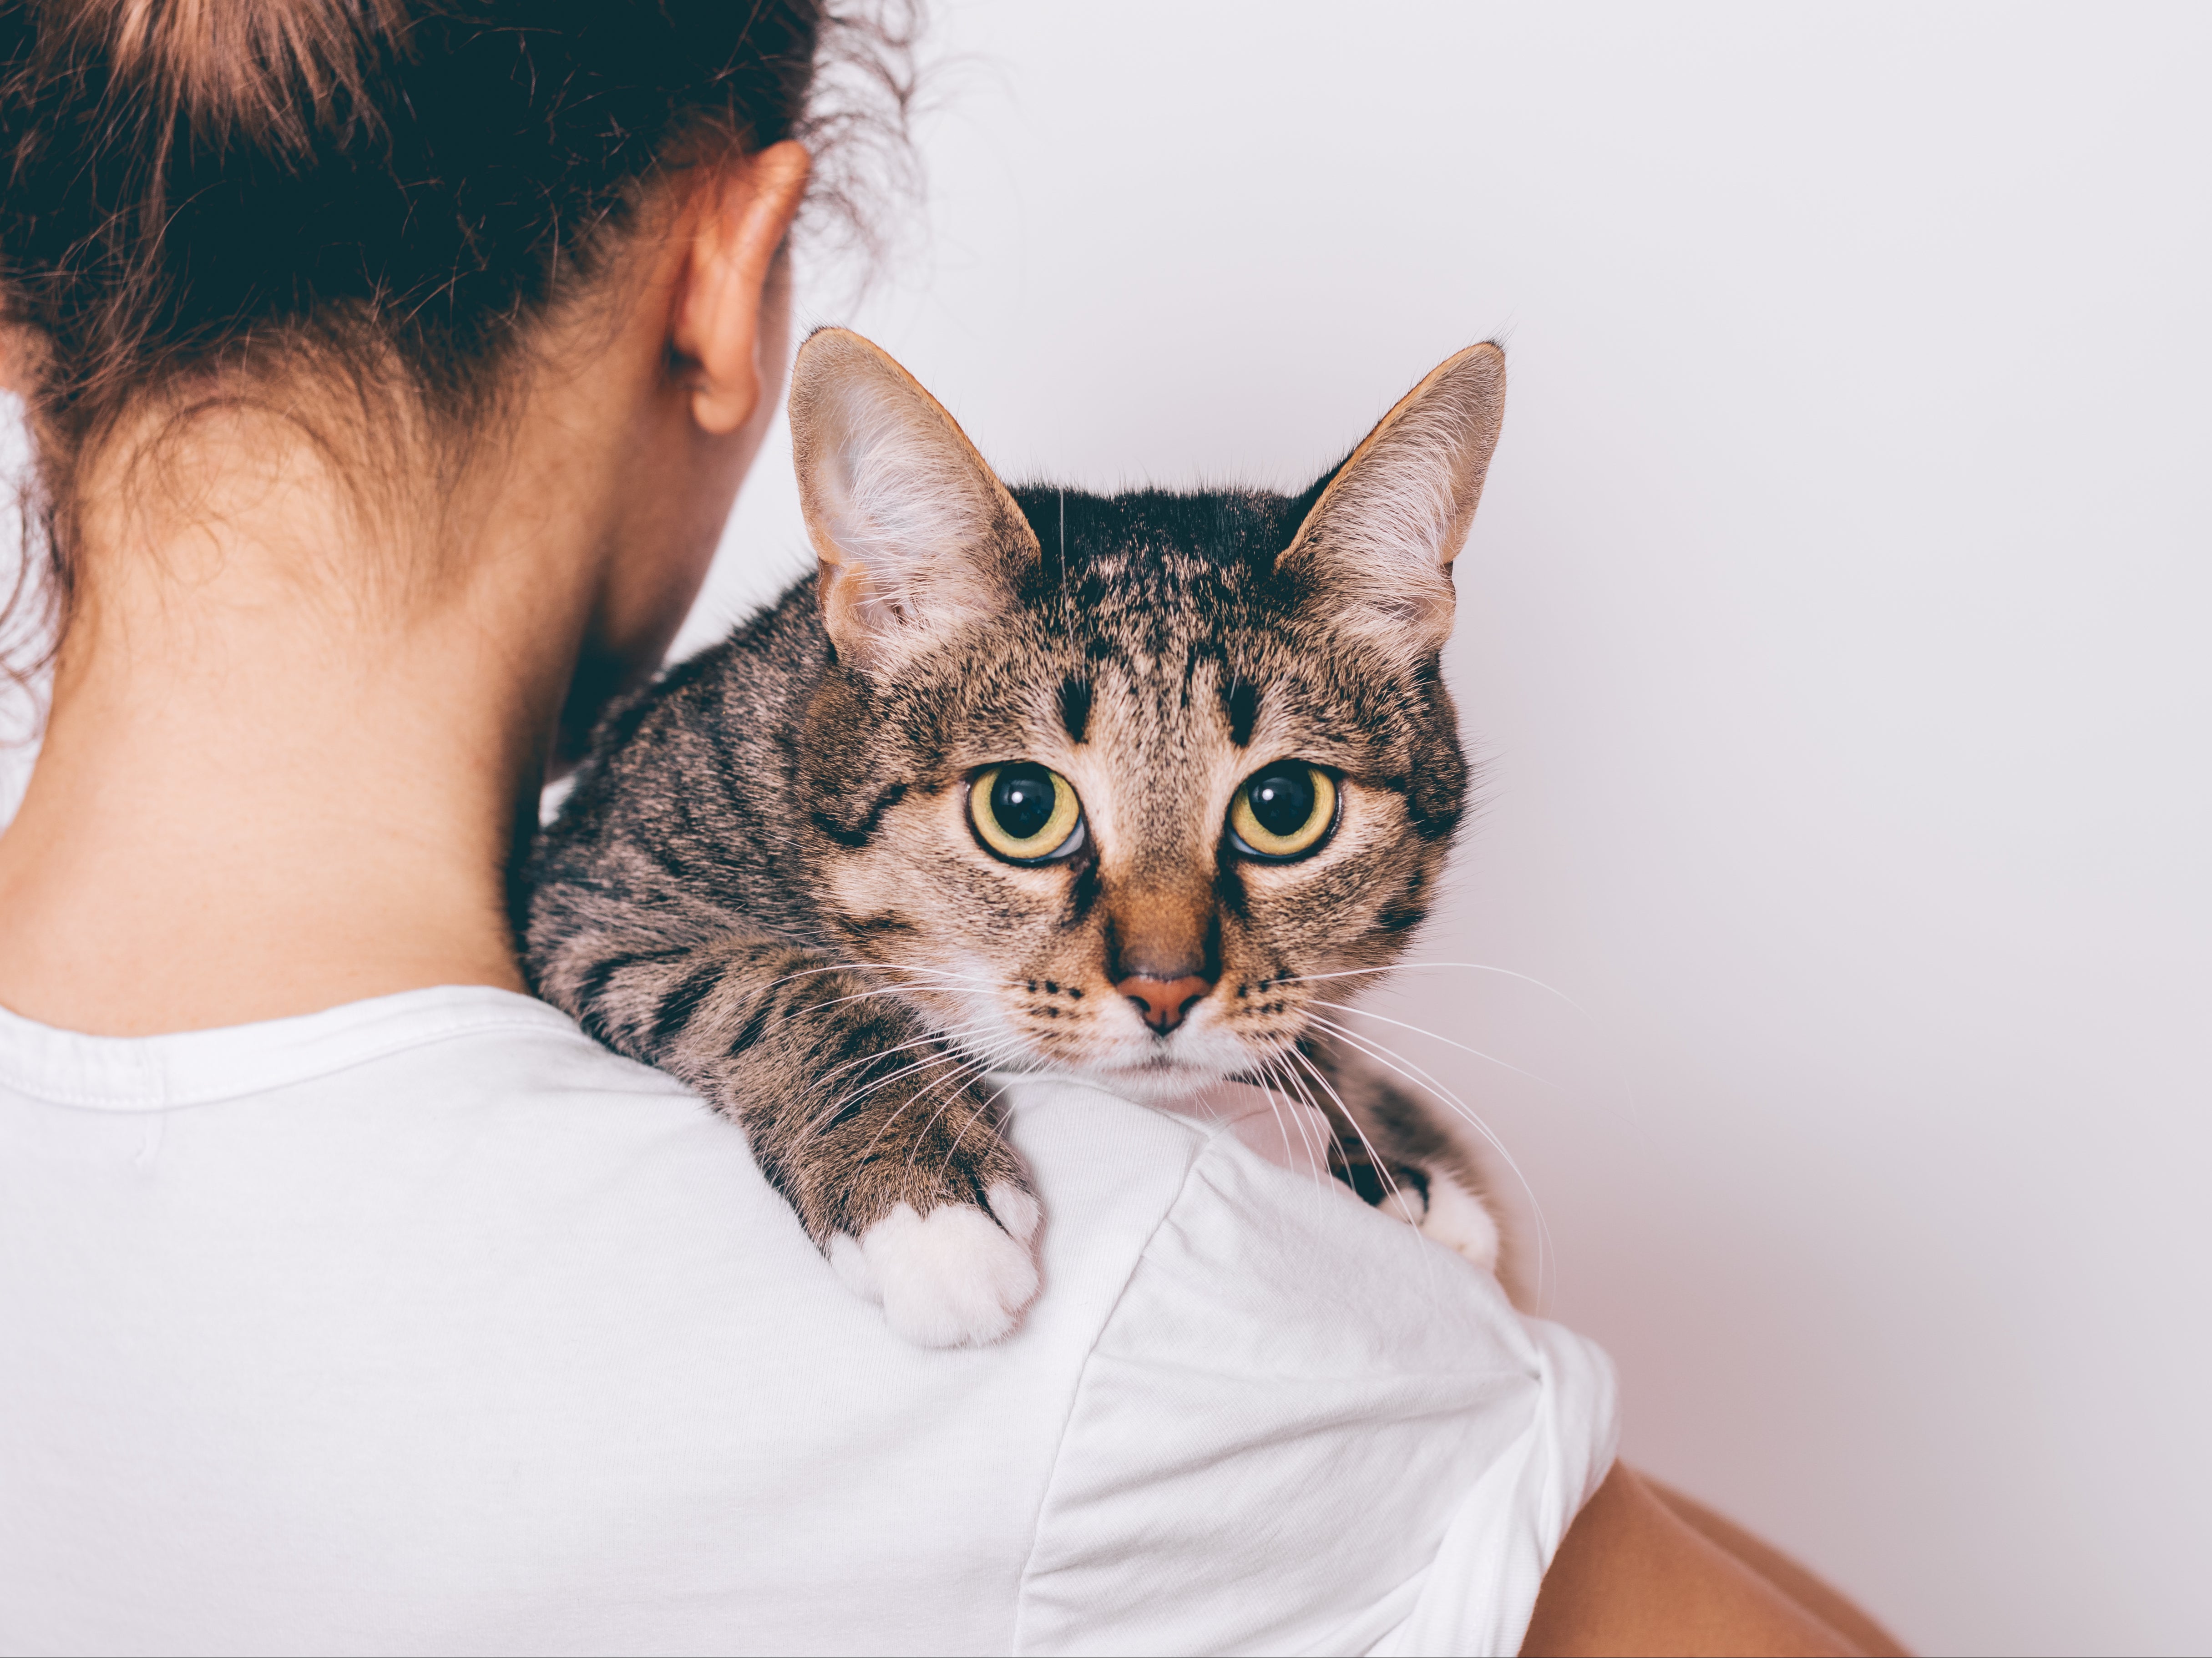 Anxious Humans Are Stressing Their Cats Out According To Study Indy100